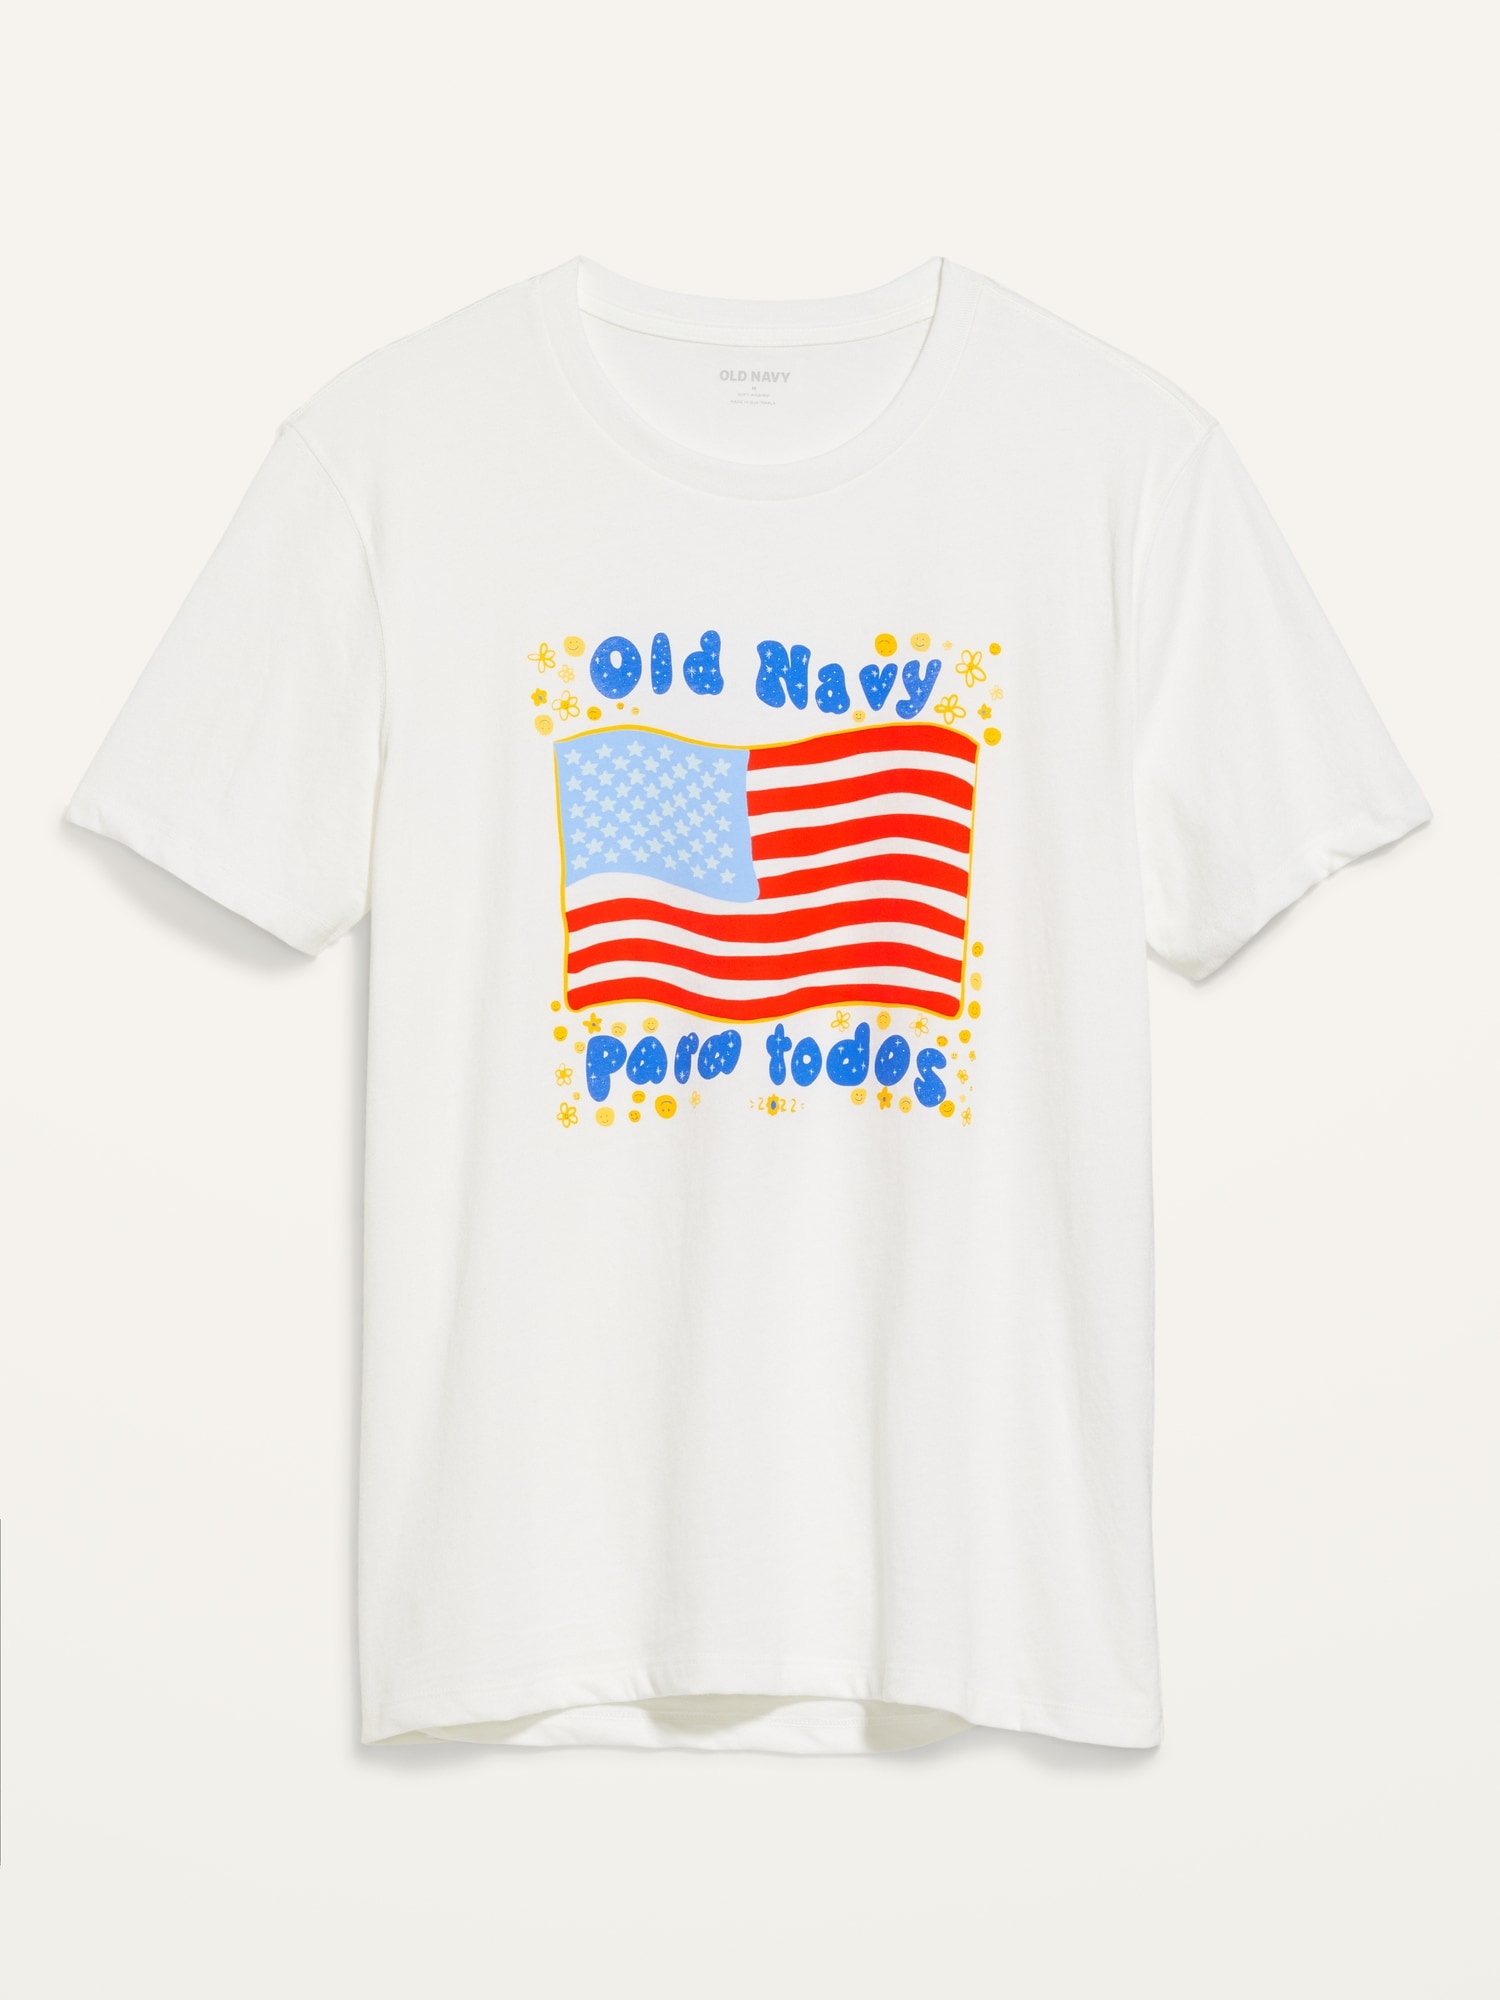 Old Navy's 2021 Flag Tees Celebrate New American Citizens